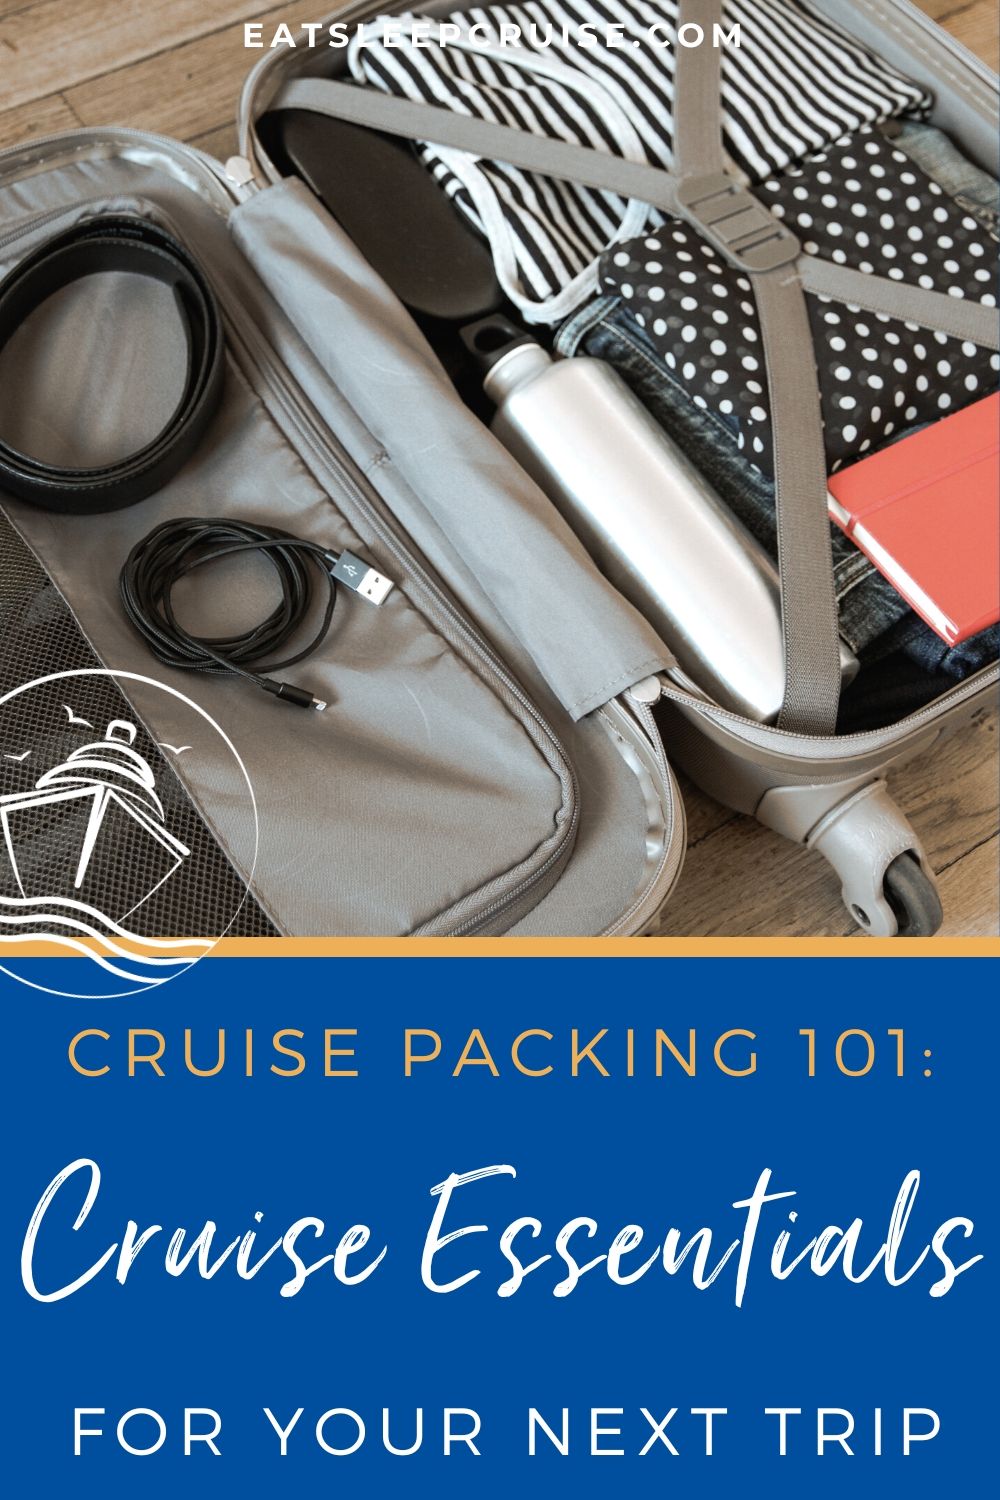 Cruise Packing 101: Cruise Essentials for Your Next Trip